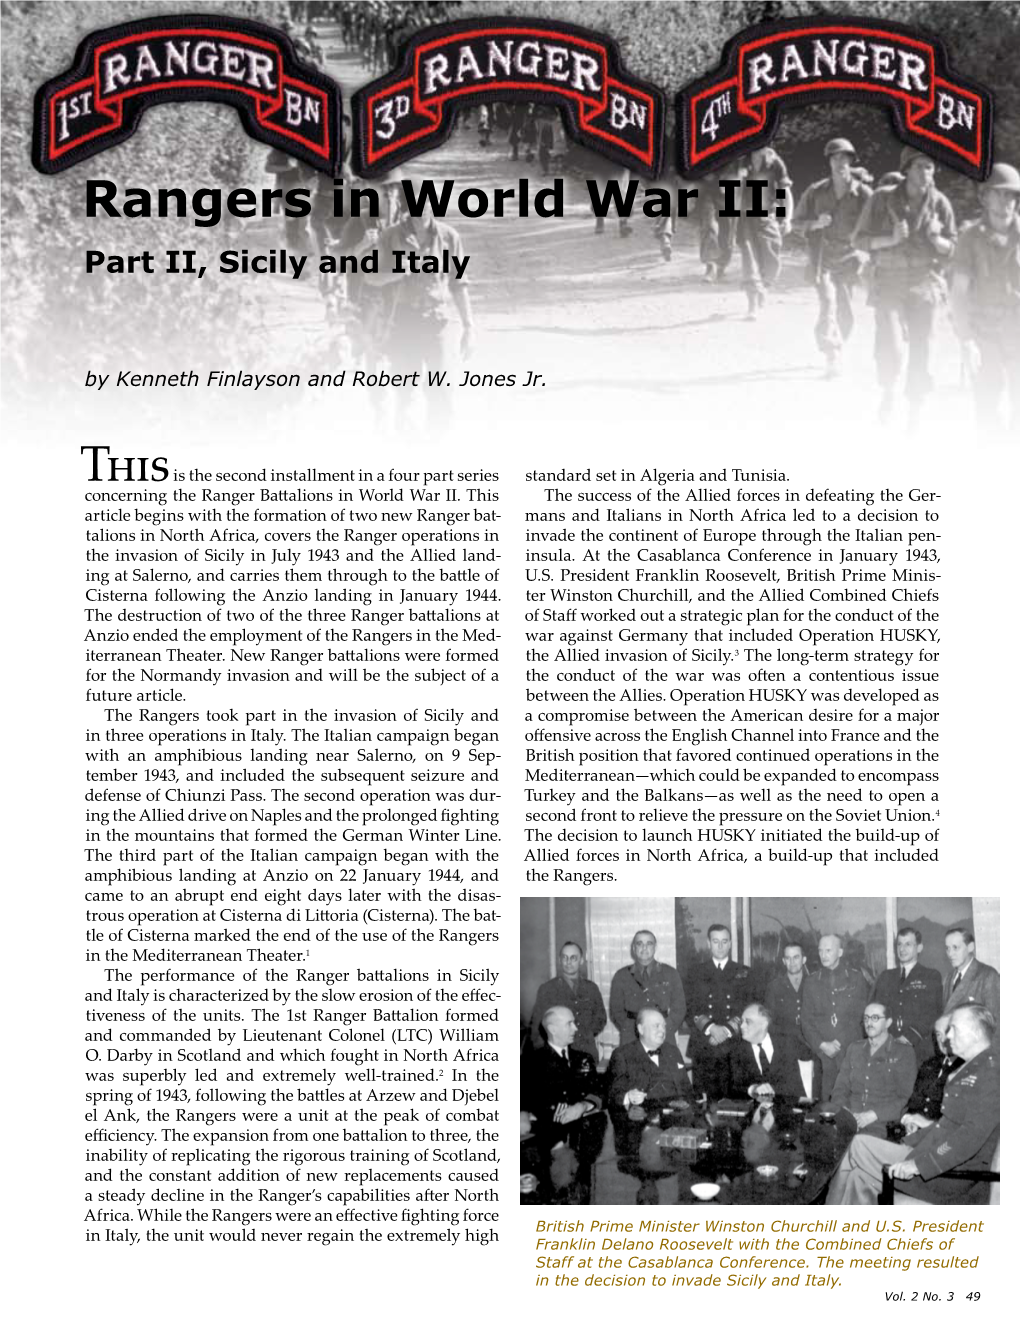 Rangers in World War II: Part II, Sicily and Italy